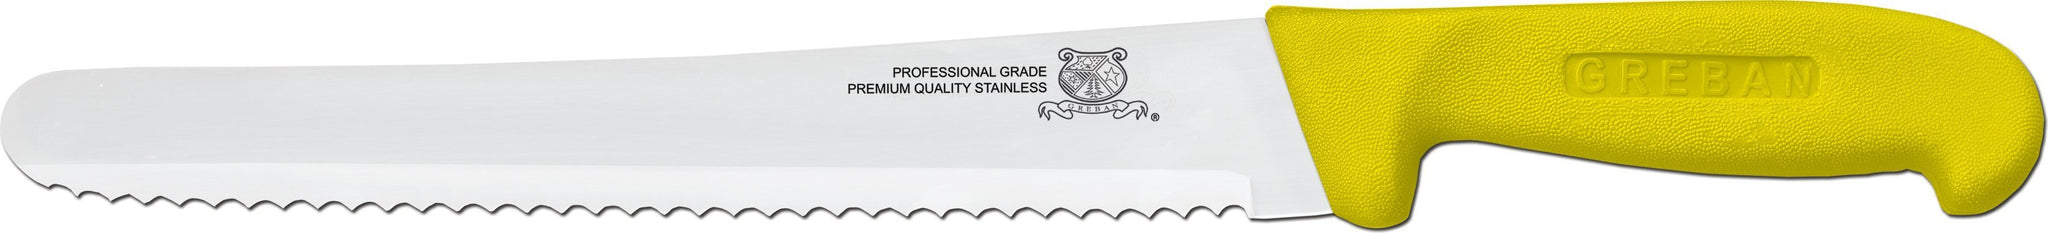 Omcan - 10” Curved Wave Edge Slicer Knife with Yellow Polypropylene Handle, 15/cs - 12467